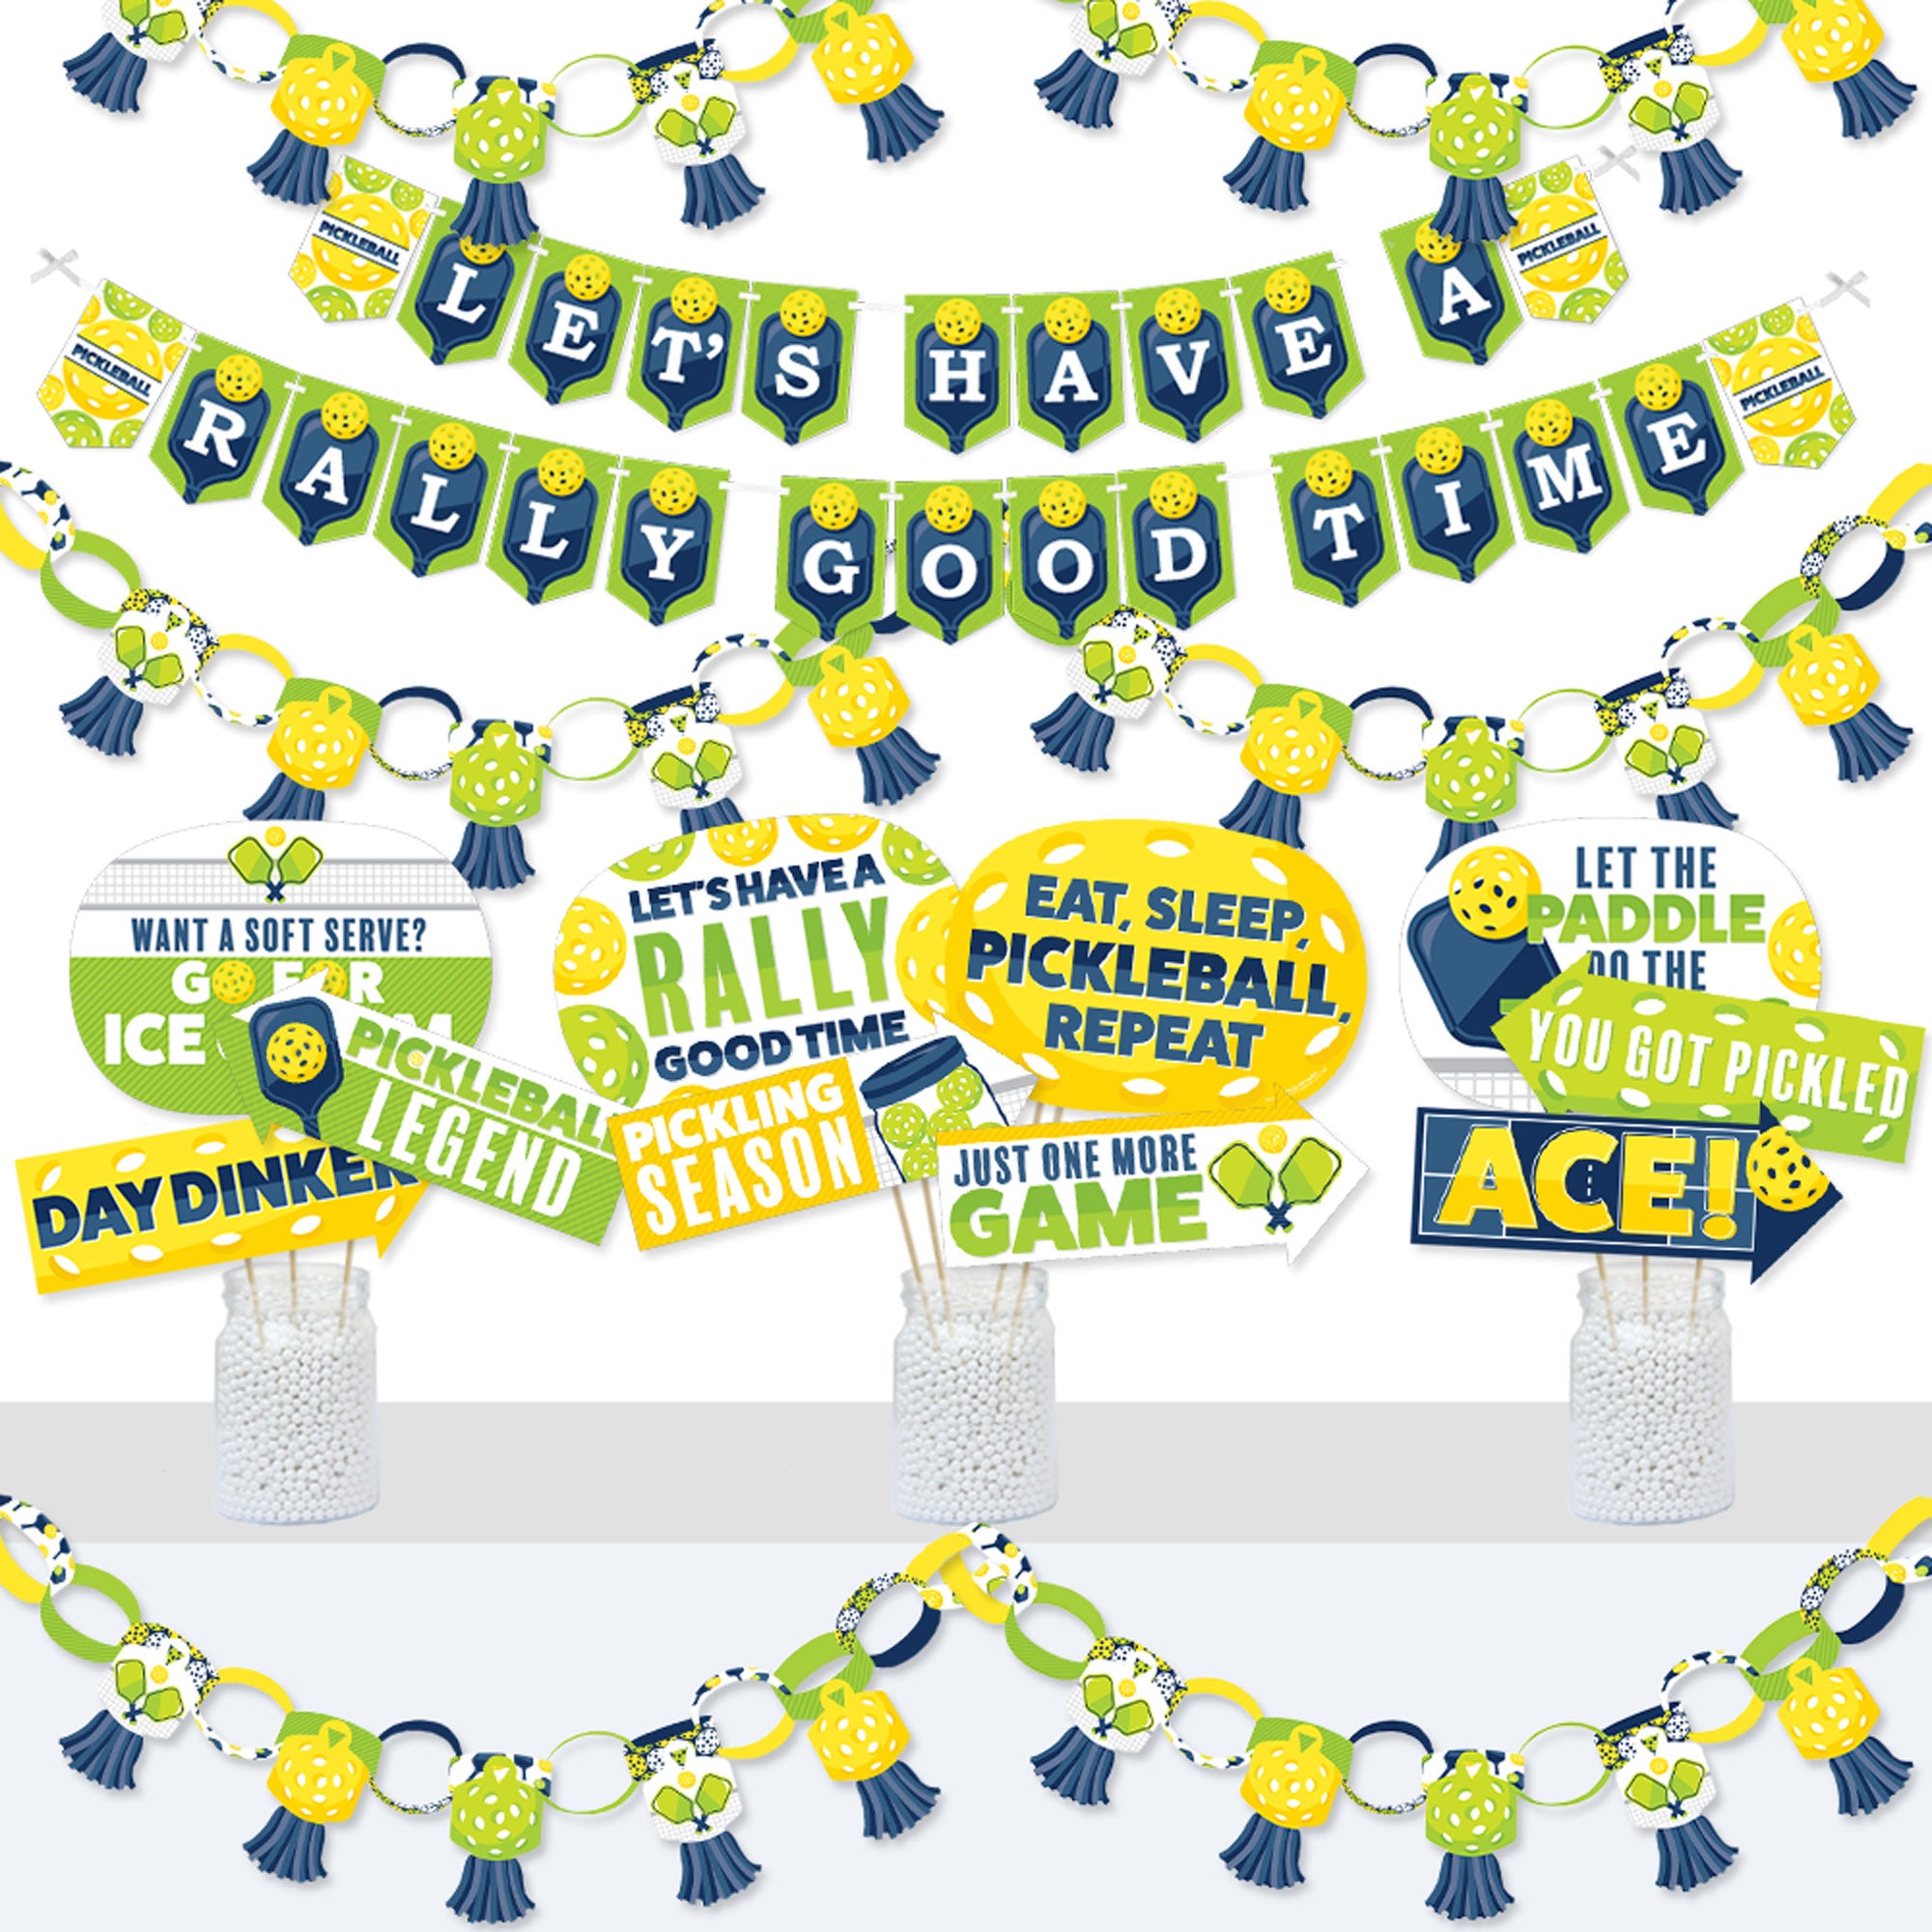 Let's Rally - Pickleball - Birthday or Retirement Party 4x6